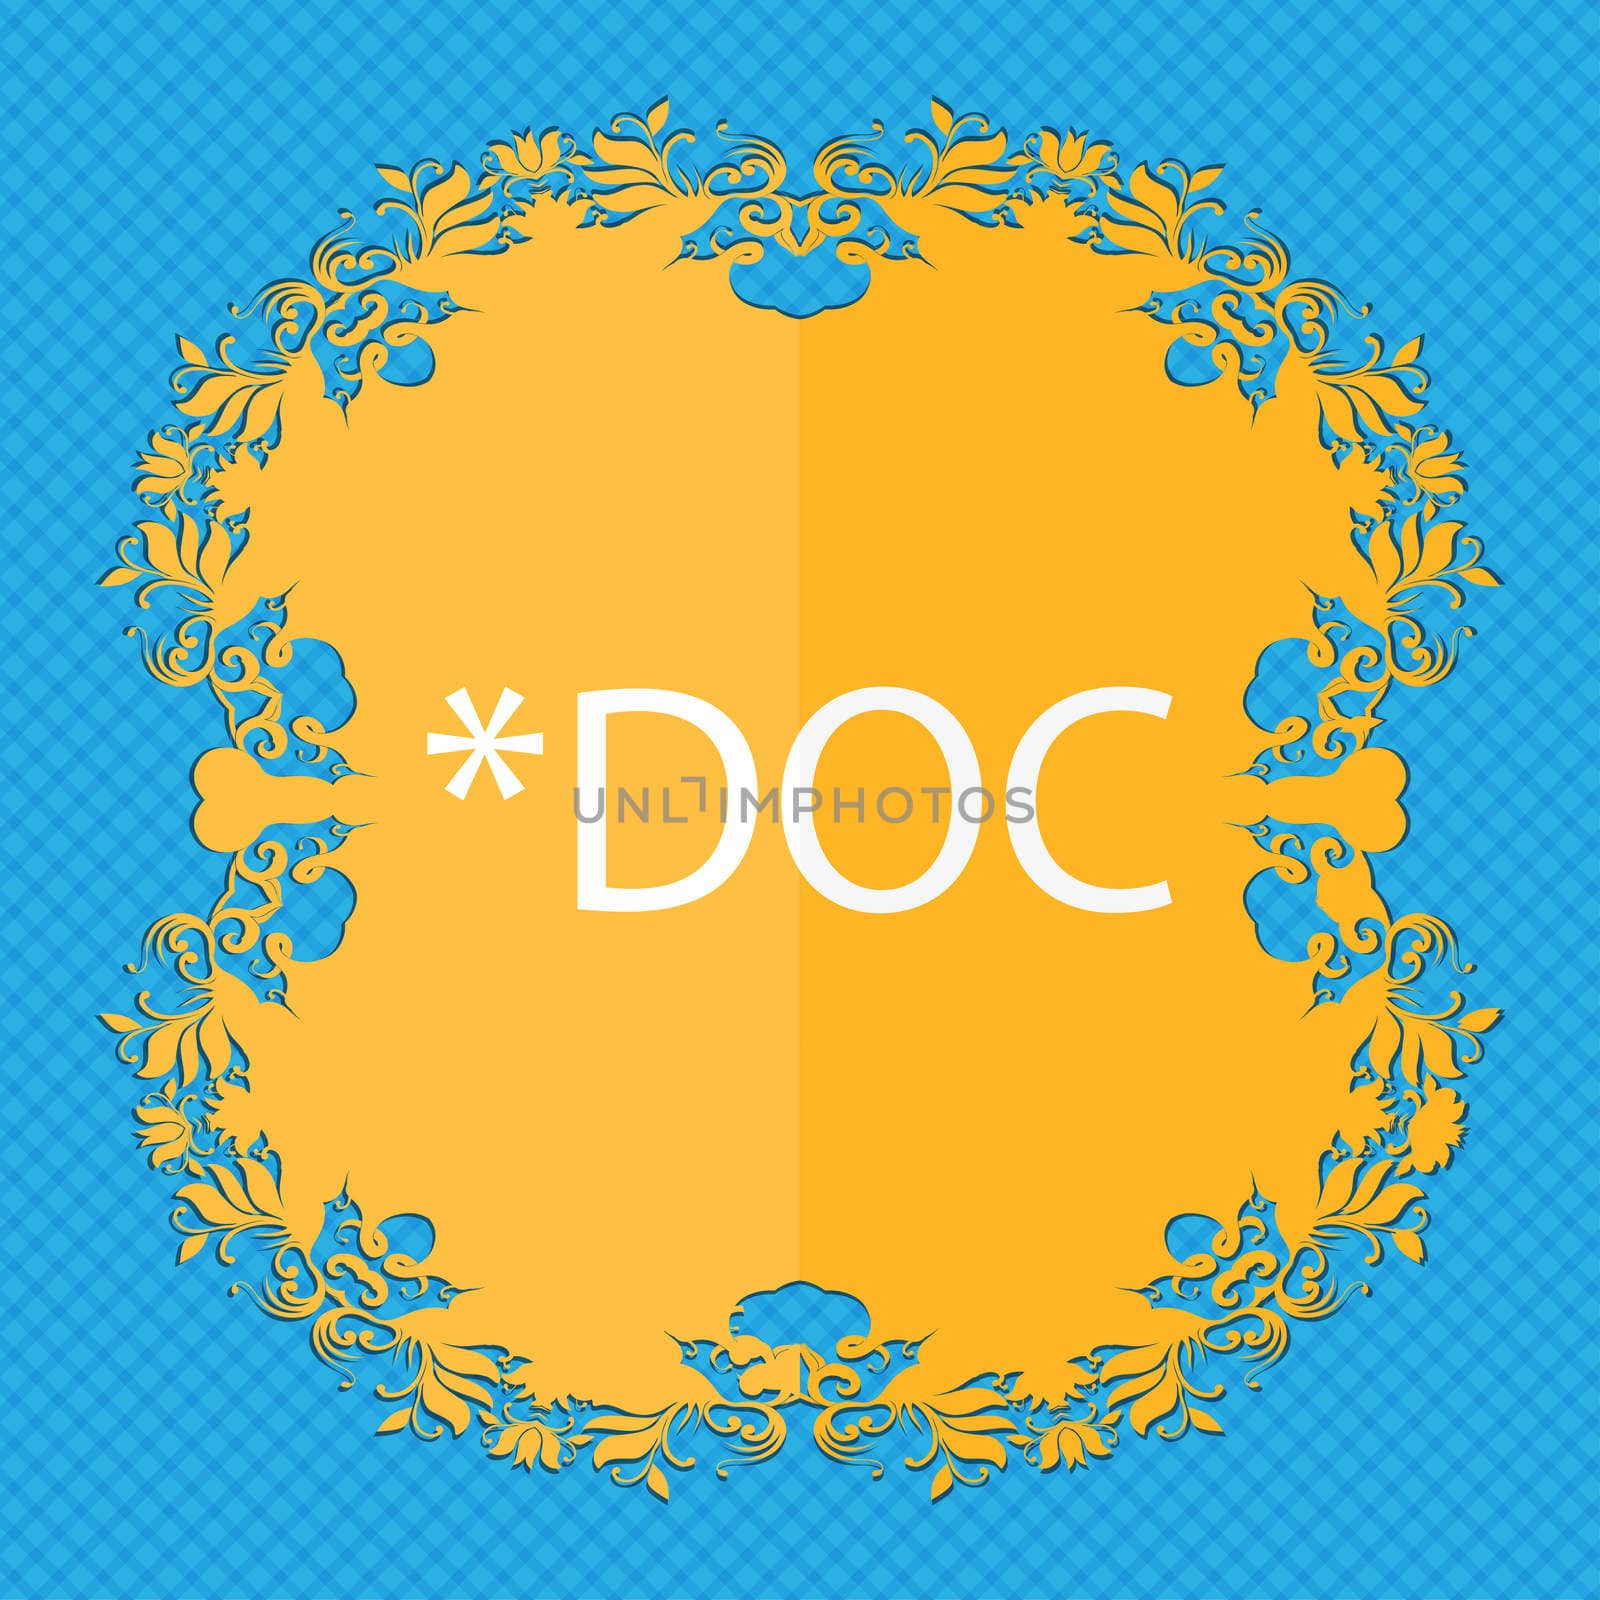 File document icon. Download doc button. Doc file extension symbol. Floral flat design on a blue abstract background with place for your text. illustration